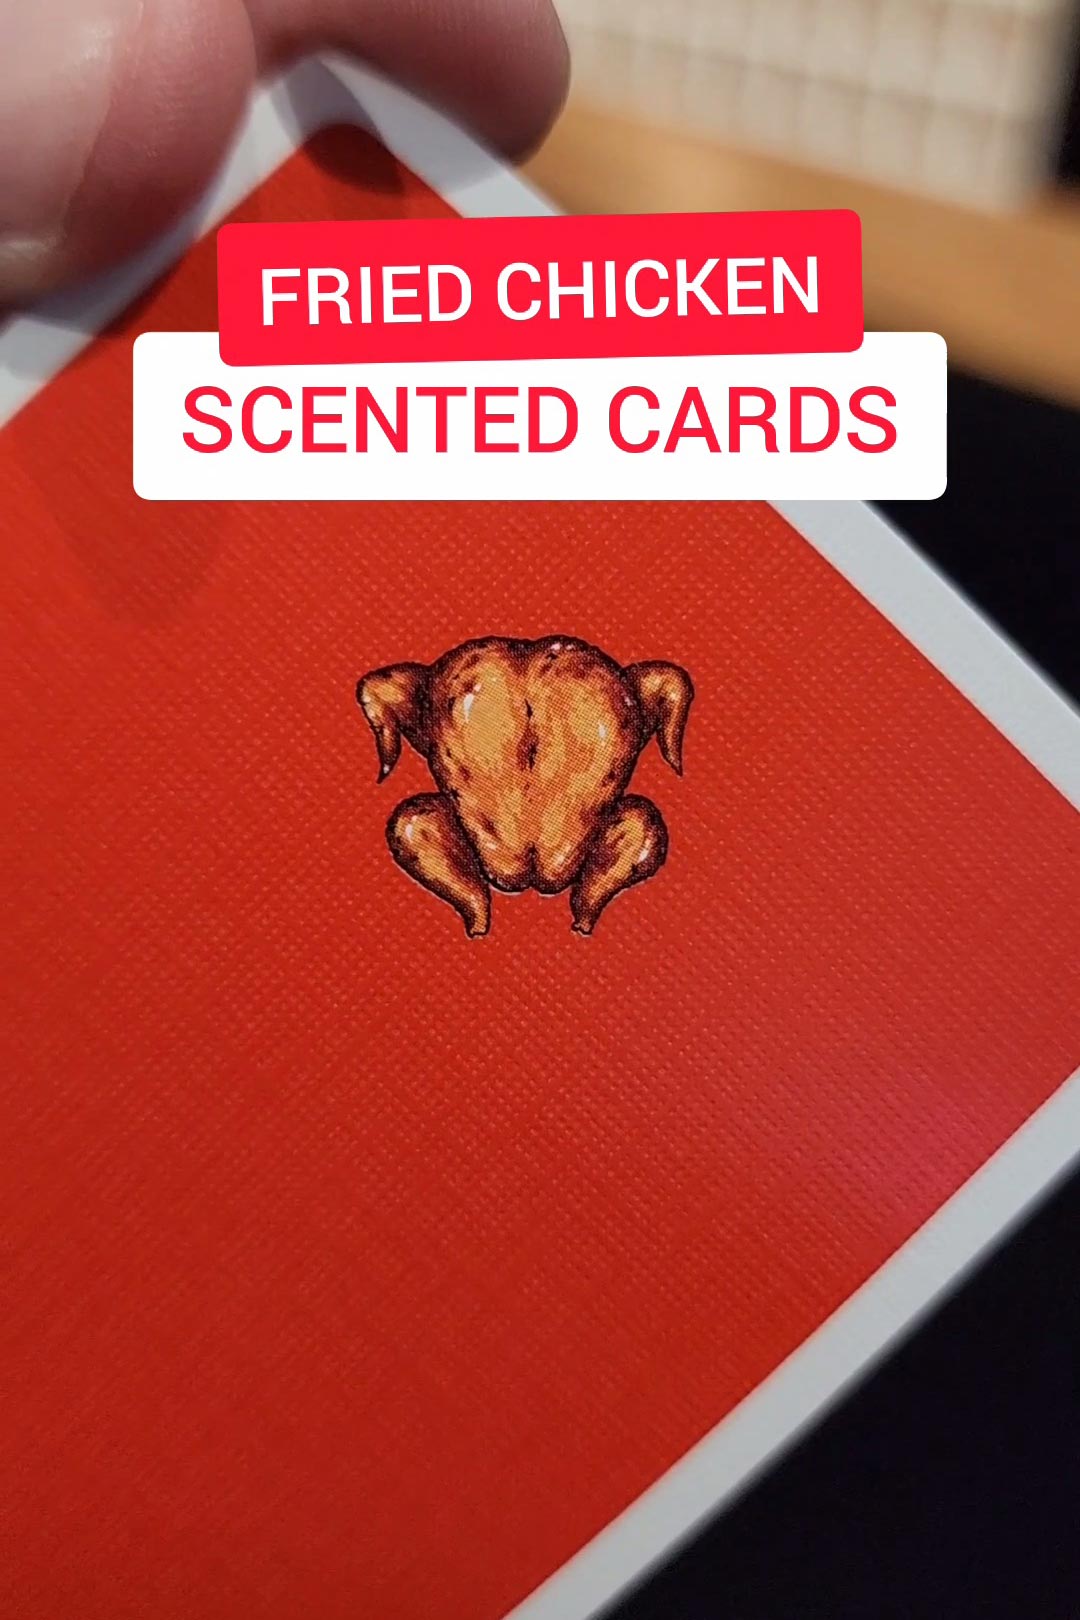 Fried Chicken Scented Playing Cards!